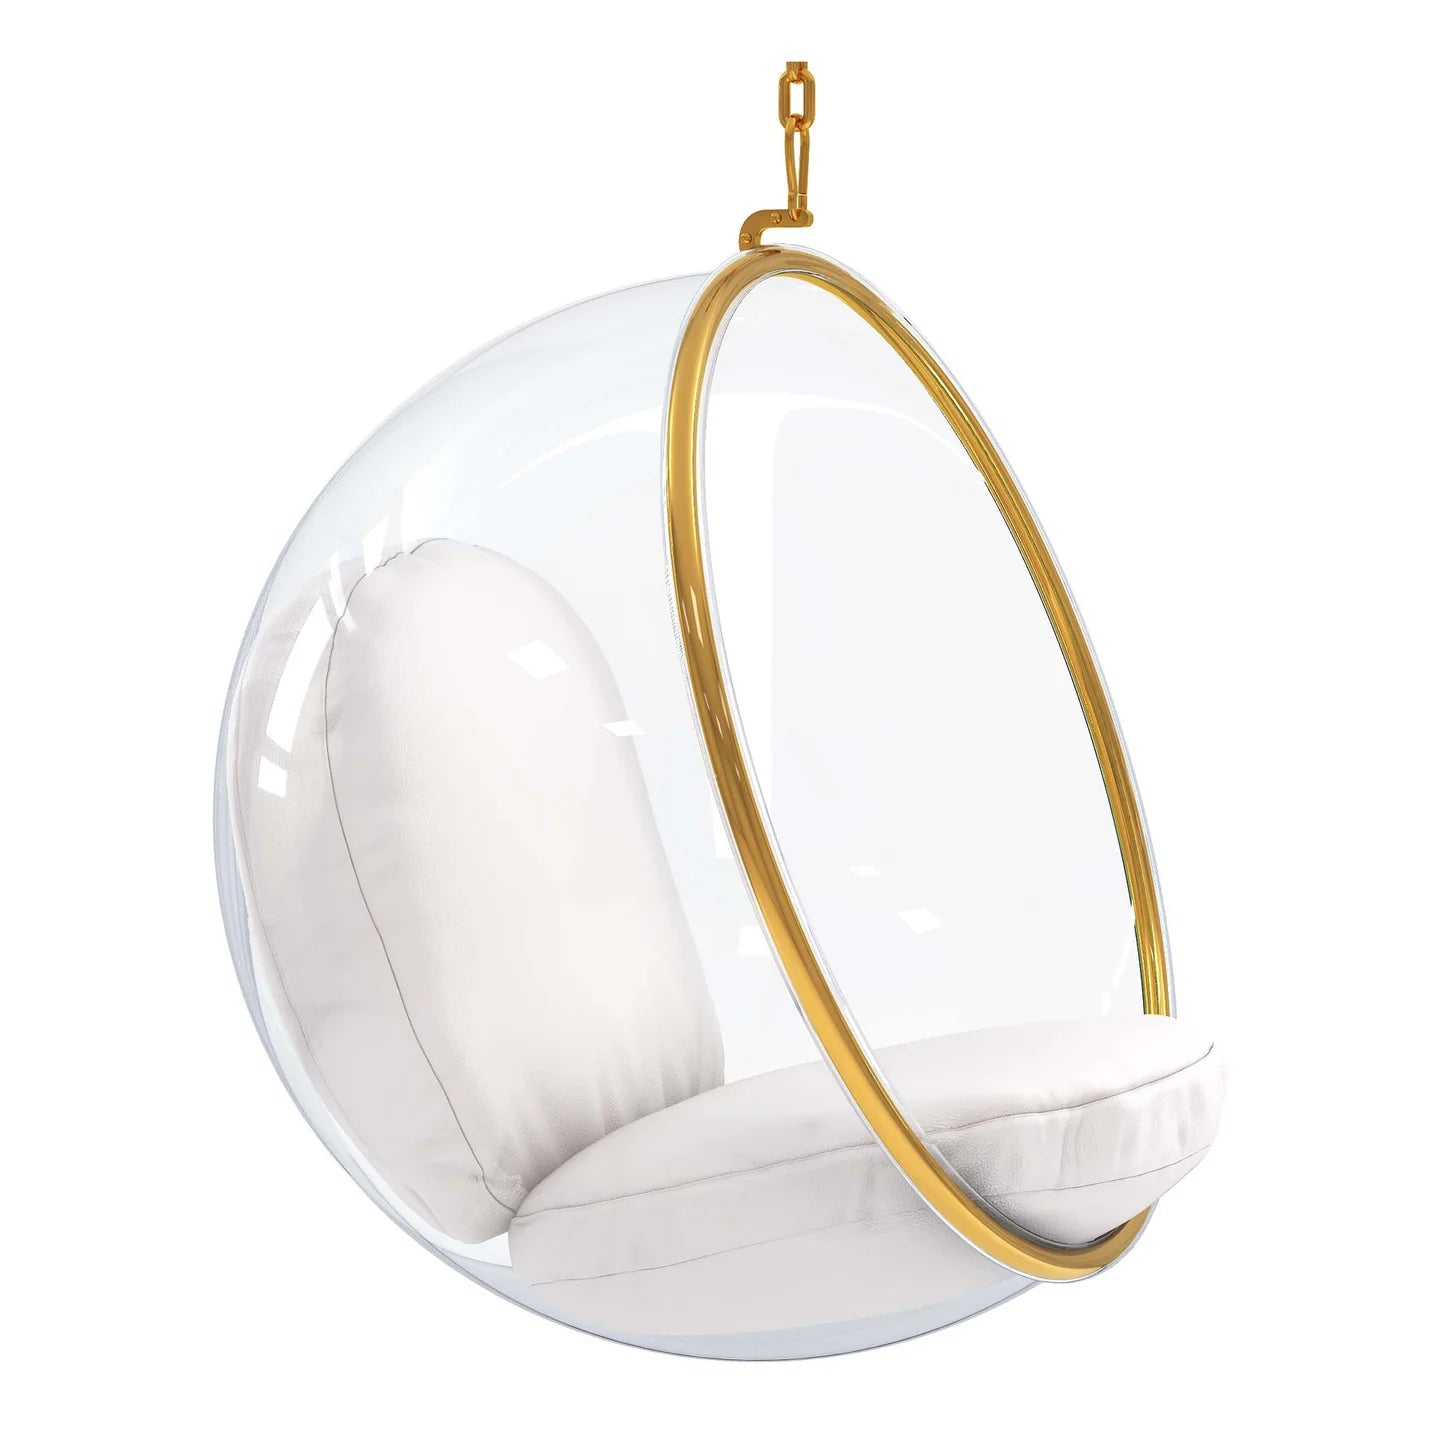  Hanging Bubble Chair, Gold By World Modern Design 